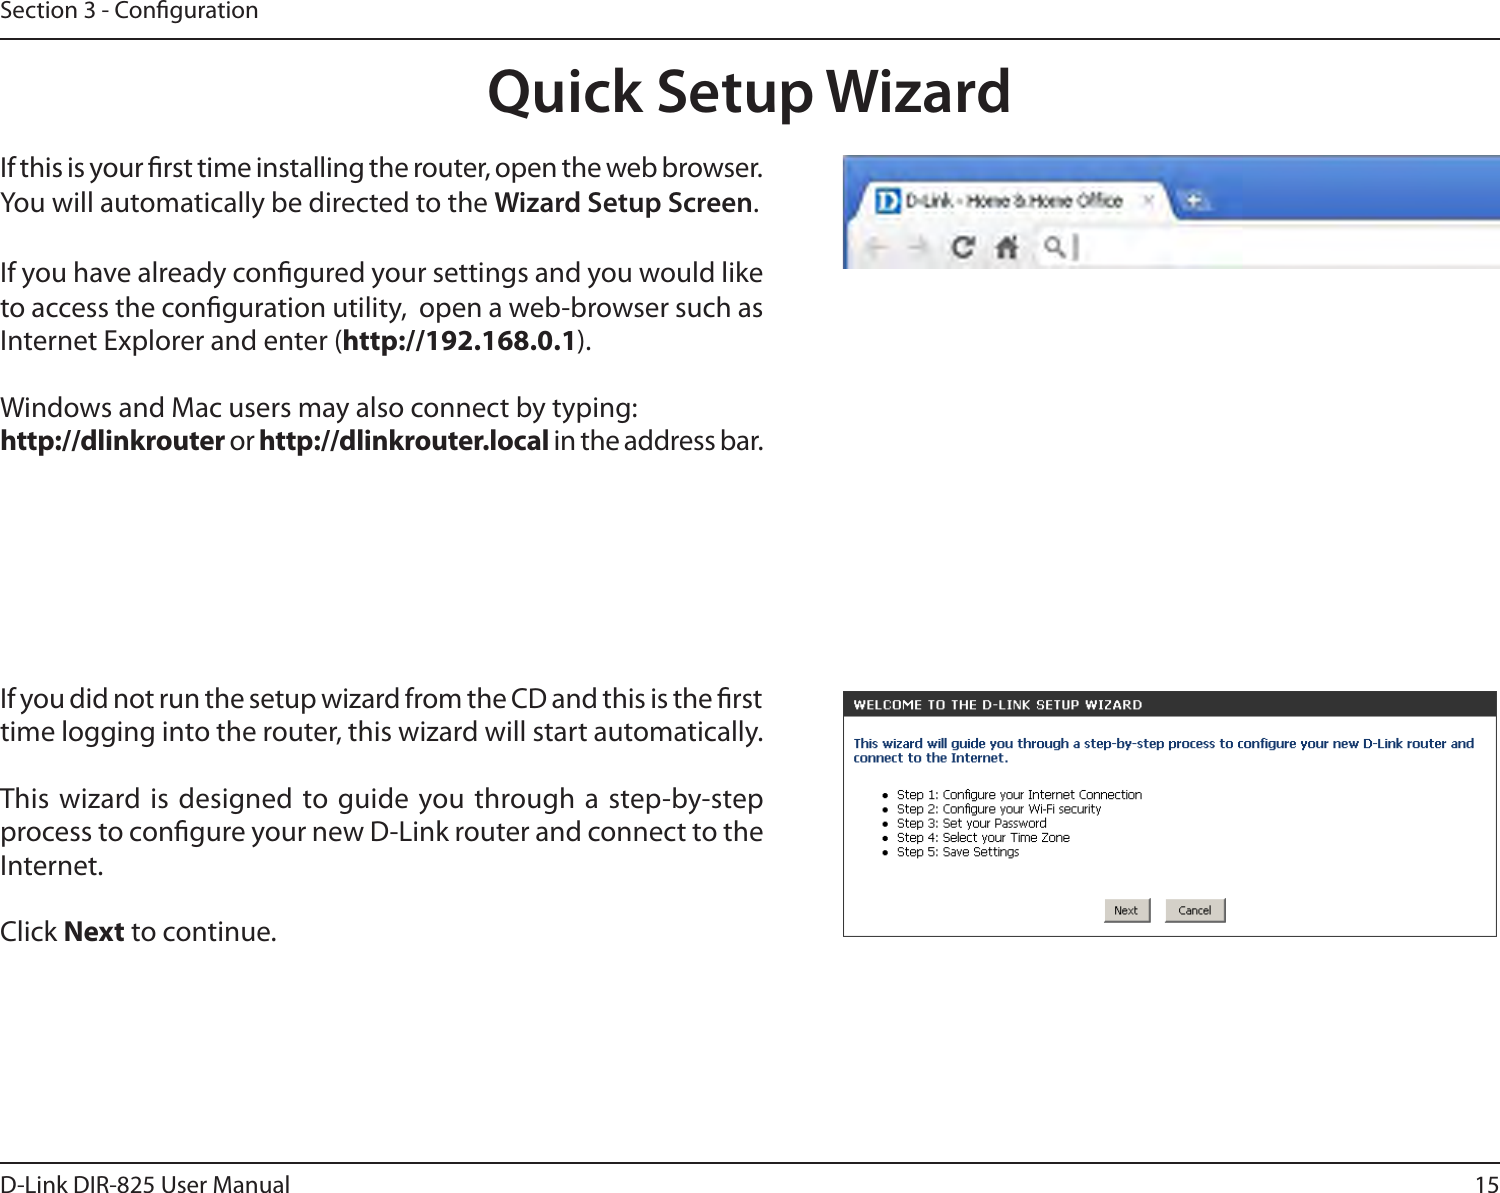 15D-Link DIR-825 User ManualSection 3 - CongurationIf you did not run the setup wizard from the CD and this is the rst time logging into the router, this wizard will start automatically. This wizard is  designed to guide you through a step-by-step process to congure your new D-Link router and connect to the Internet.Click Next to continue. Quick Setup WizardIf this is your rst time installing the router, open the web browser. You will automatically be directed to the Wizard Setup Screen. If you have already congured your settings and you would like to access the conguration utility,  open a web-browser such as Internet Explorer and enter (http://192.168.0.1).Windows and Mac users may also connect by typing: http://dlinkrouter or http://dlinkrouter.local in the address bar.